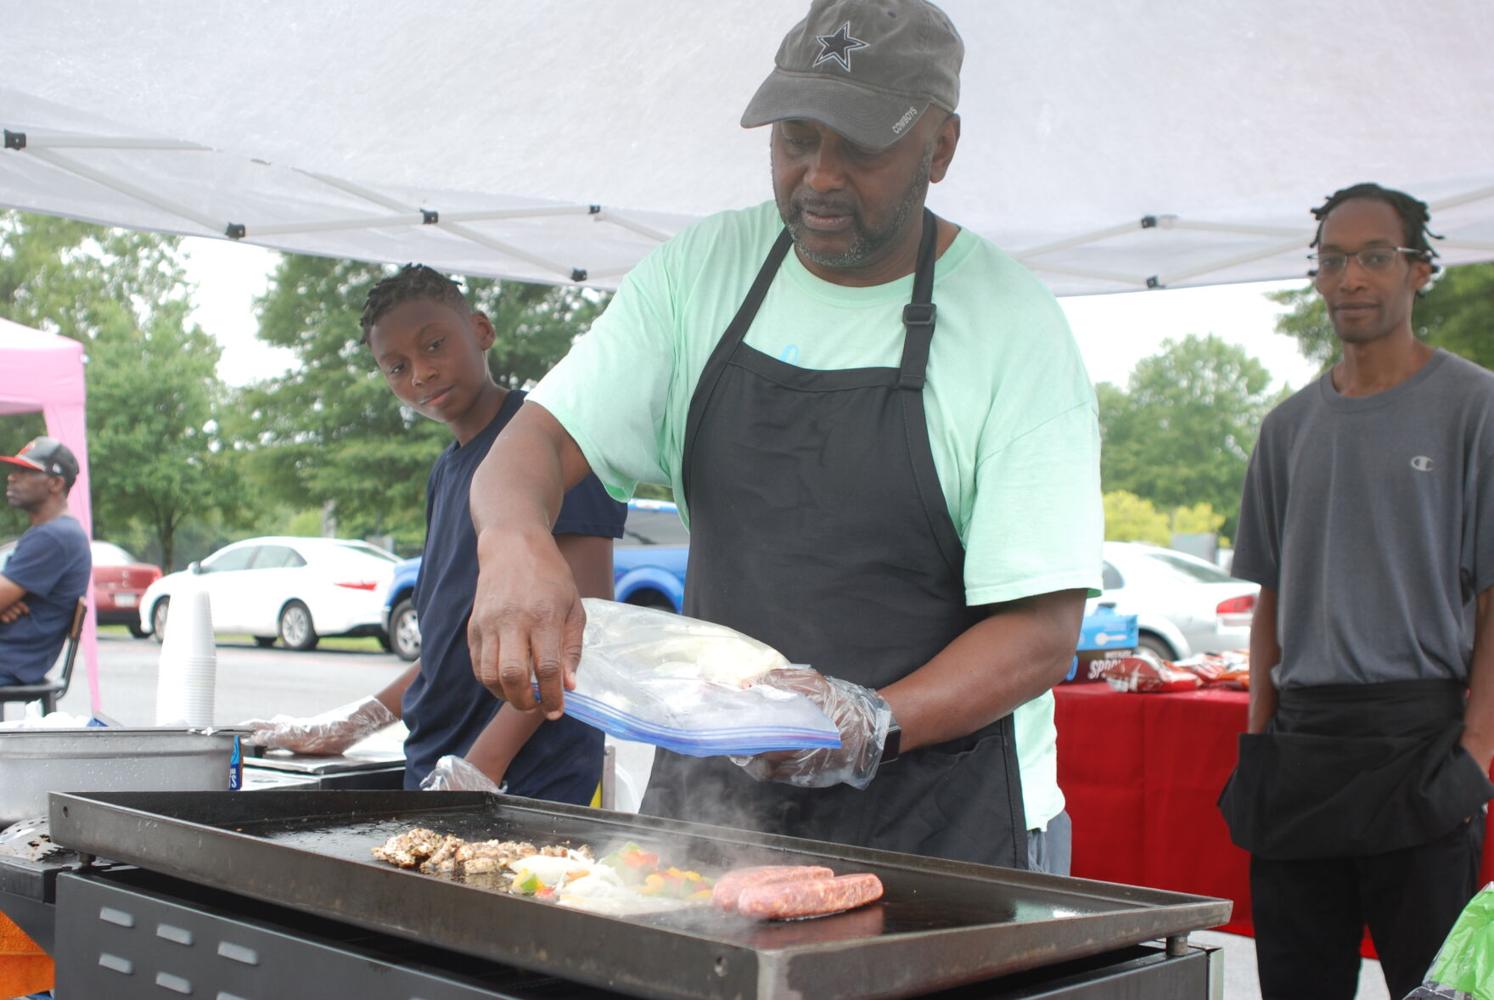 Cobb Food Tasting Festival attracts from all over, offers